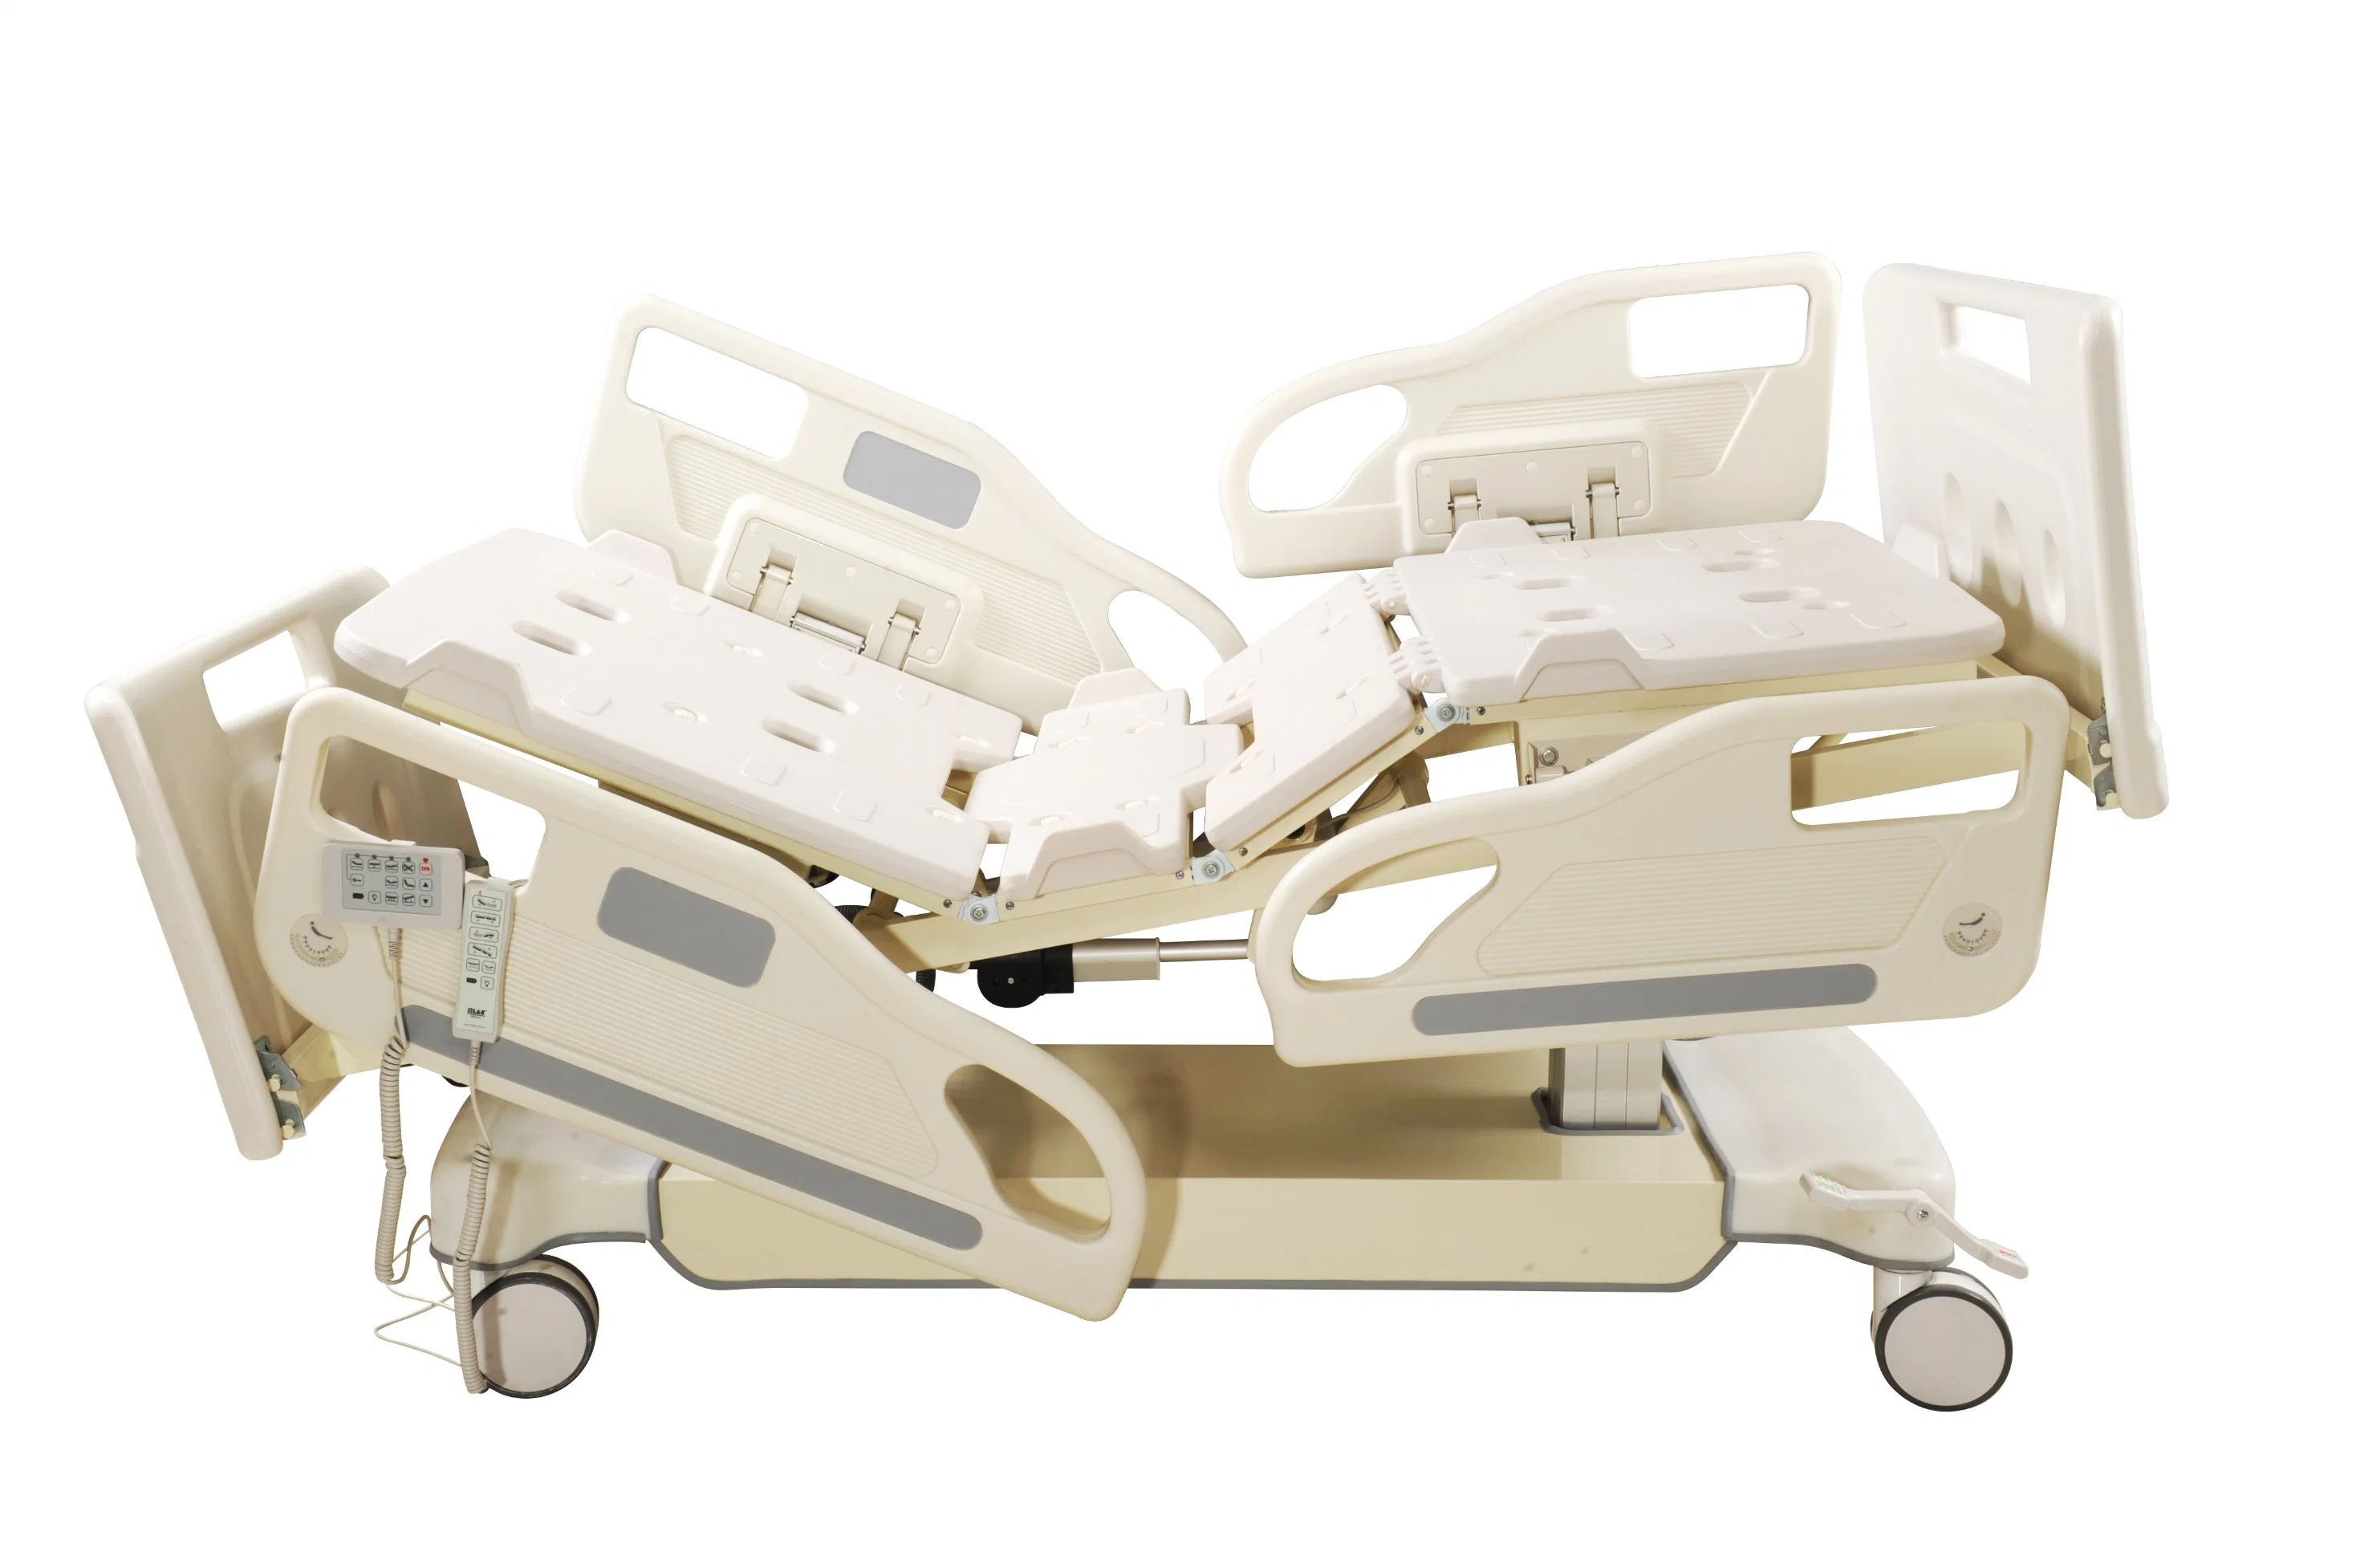 Medical Furniture Medical ICU 5 Function Electric Adjustable Bed Hospital with Control Panel